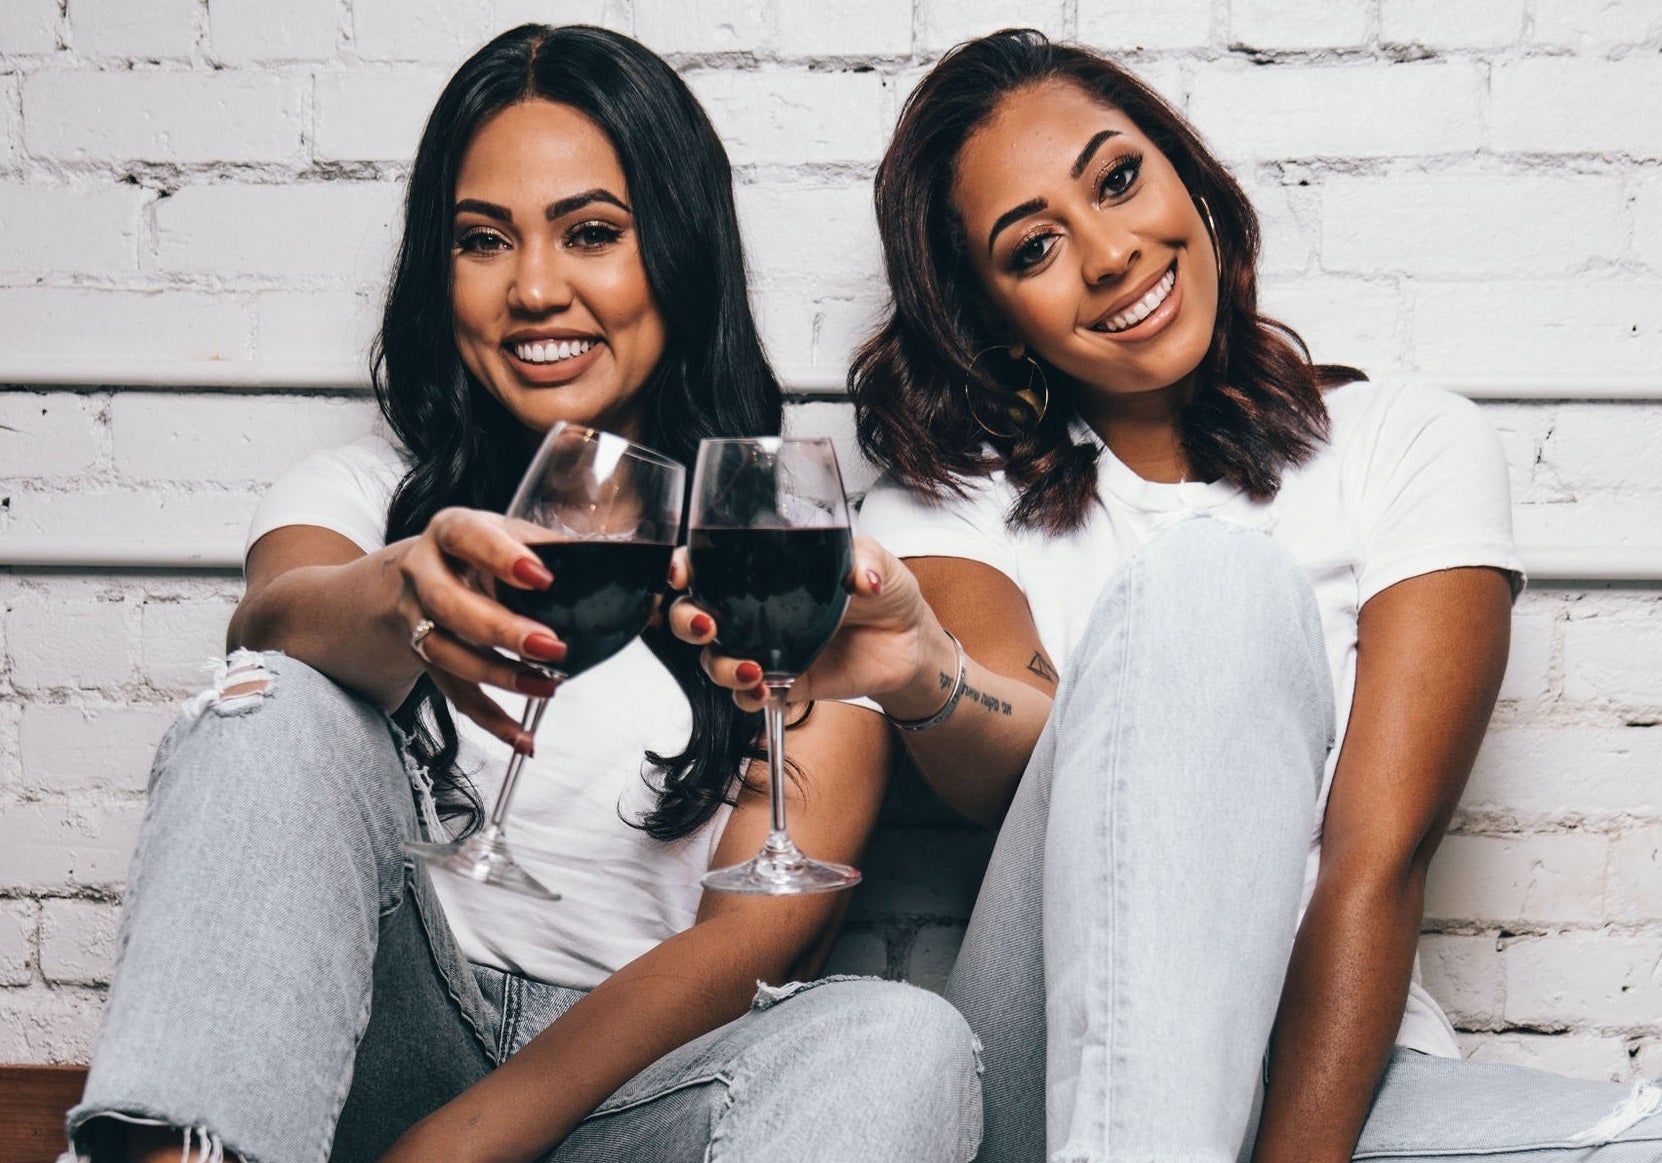 EXCLUSIVE: Ayesha Curry & Sydel Curry-Lee Talk Relaunching Their Wine Brand After Its Acquisition: "This Is A Toast To Powerful Women"